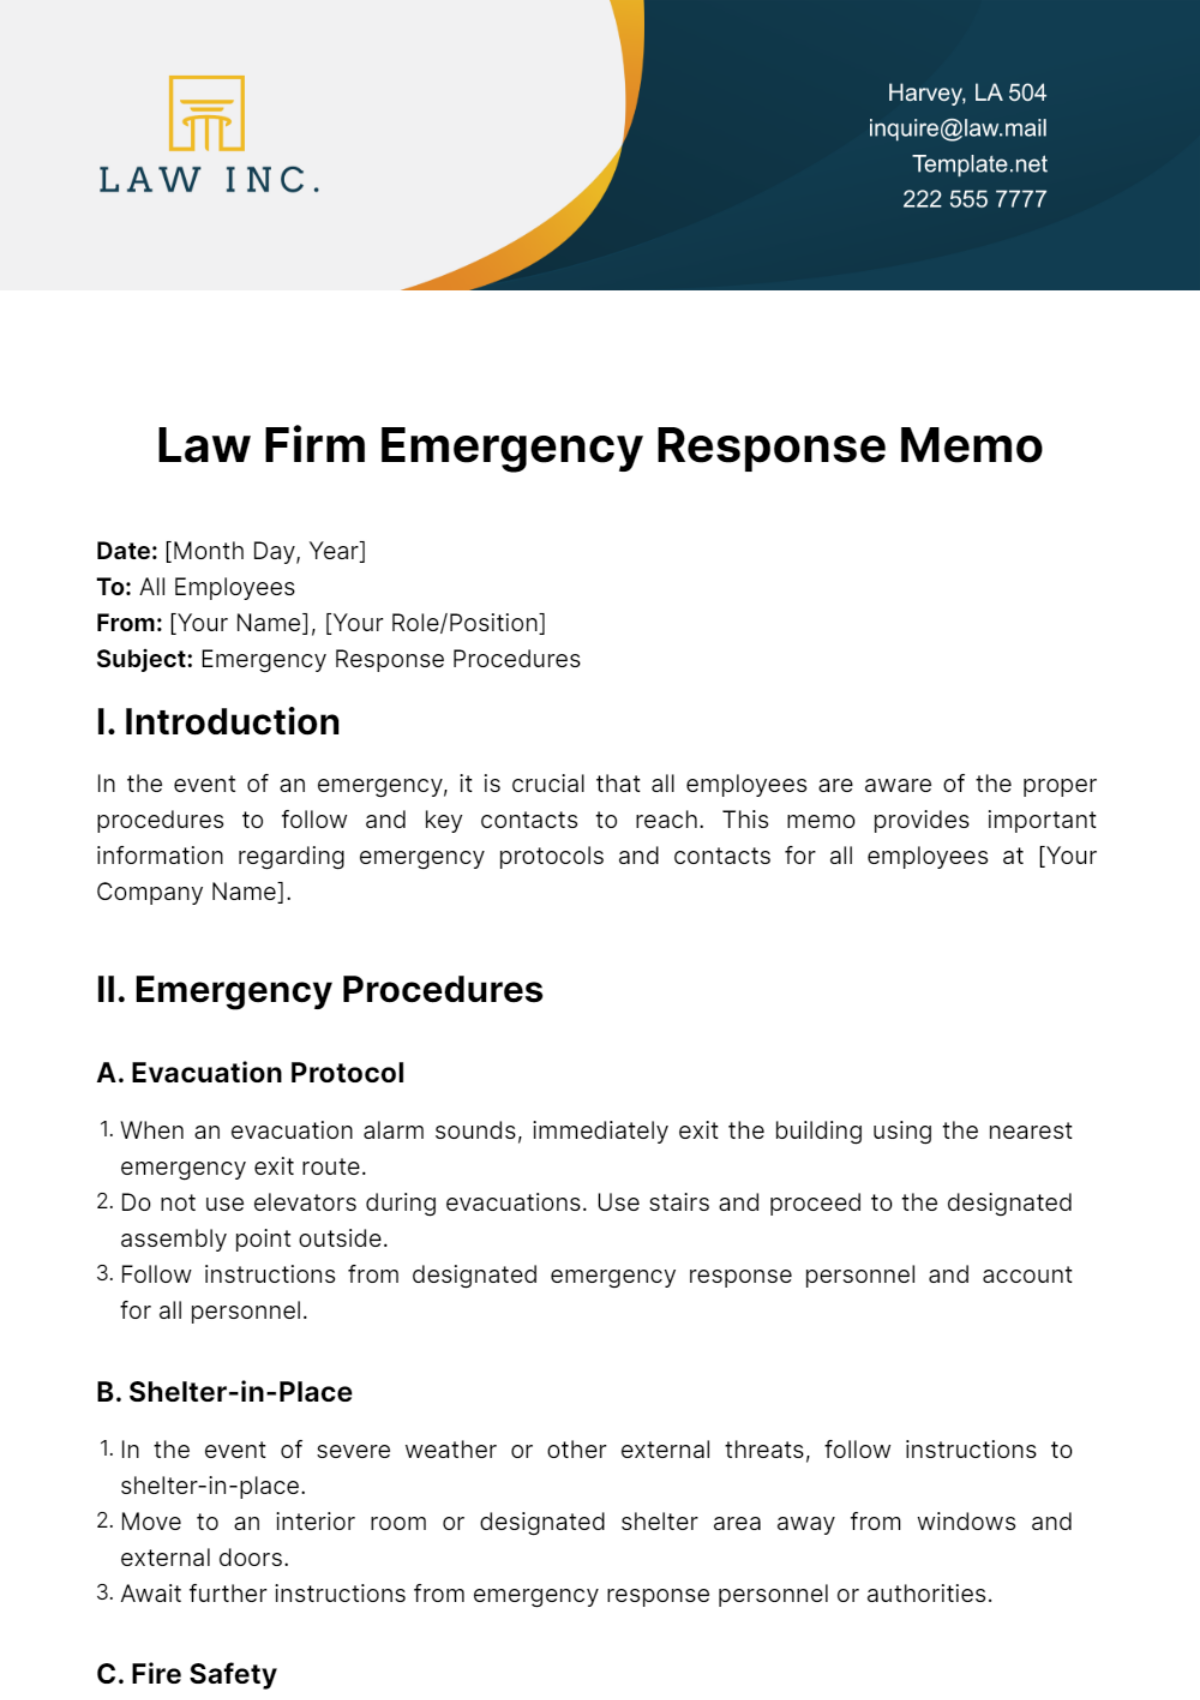 Law Firm Emergency Response Memo Template